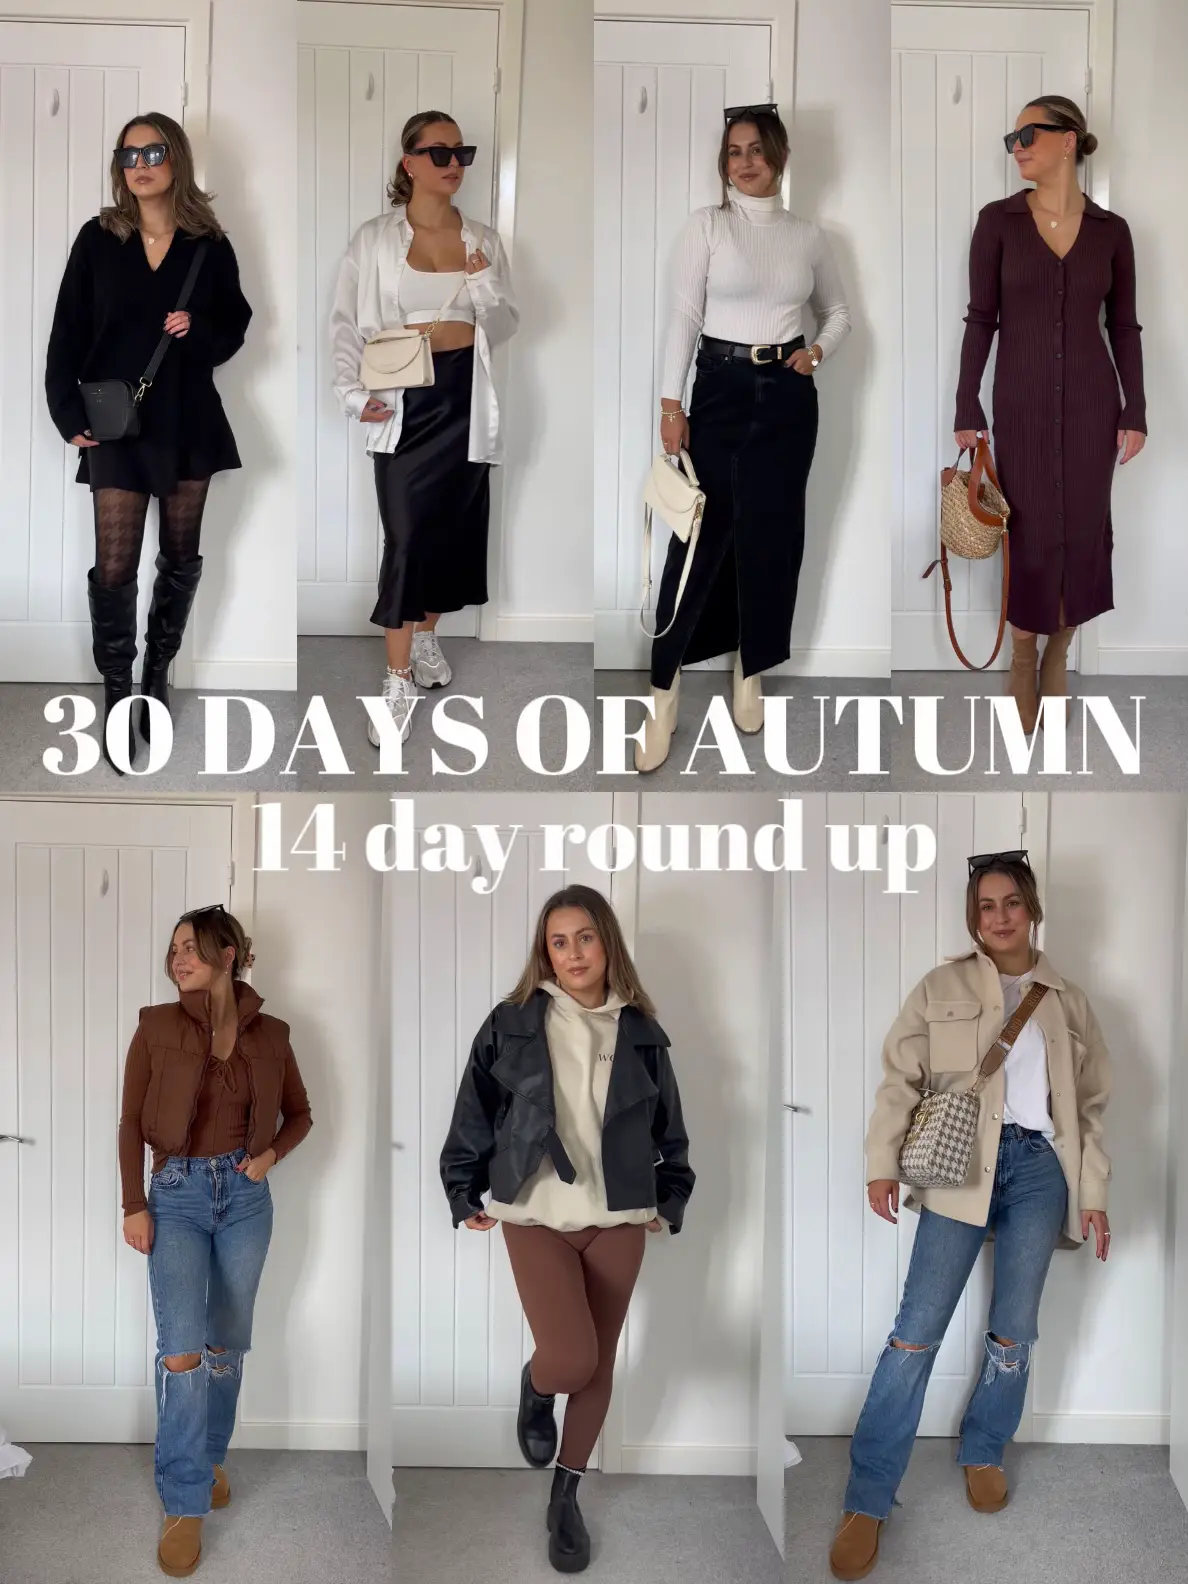 Autumn going out outfits - Lemon8 Search